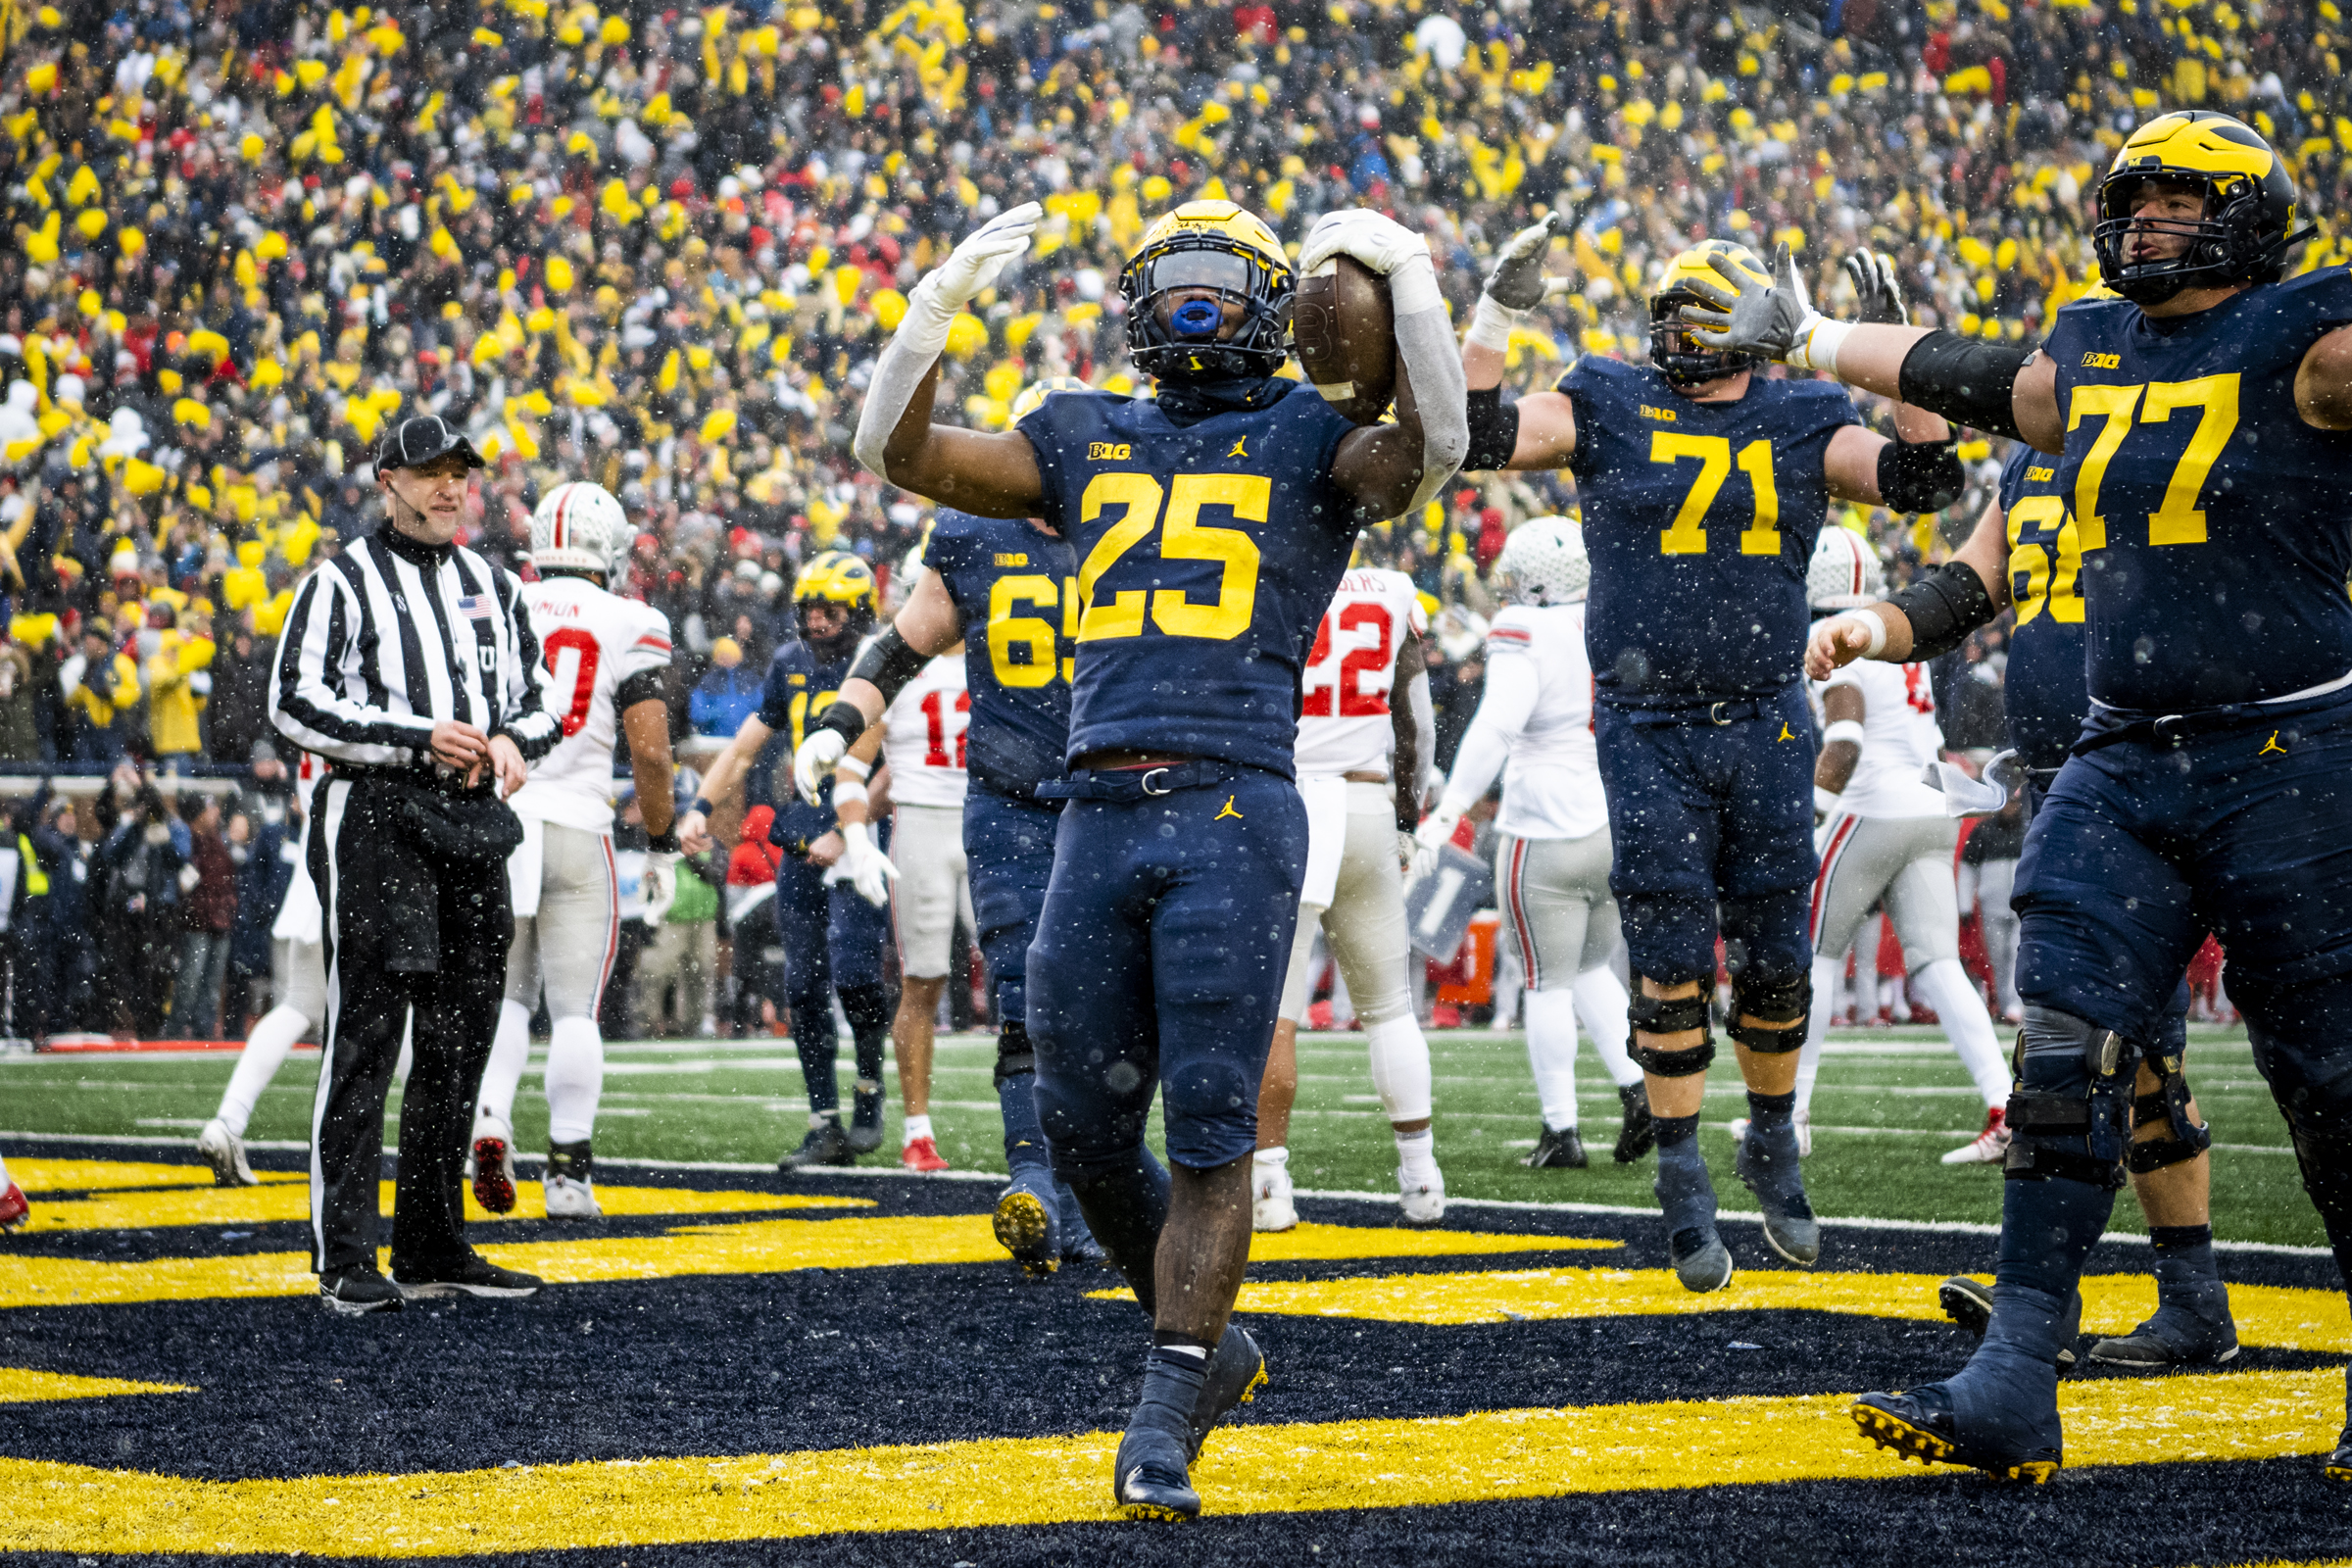 Hassan Haskins' historic day leads Michigan over Ohio State, Patriots interested?